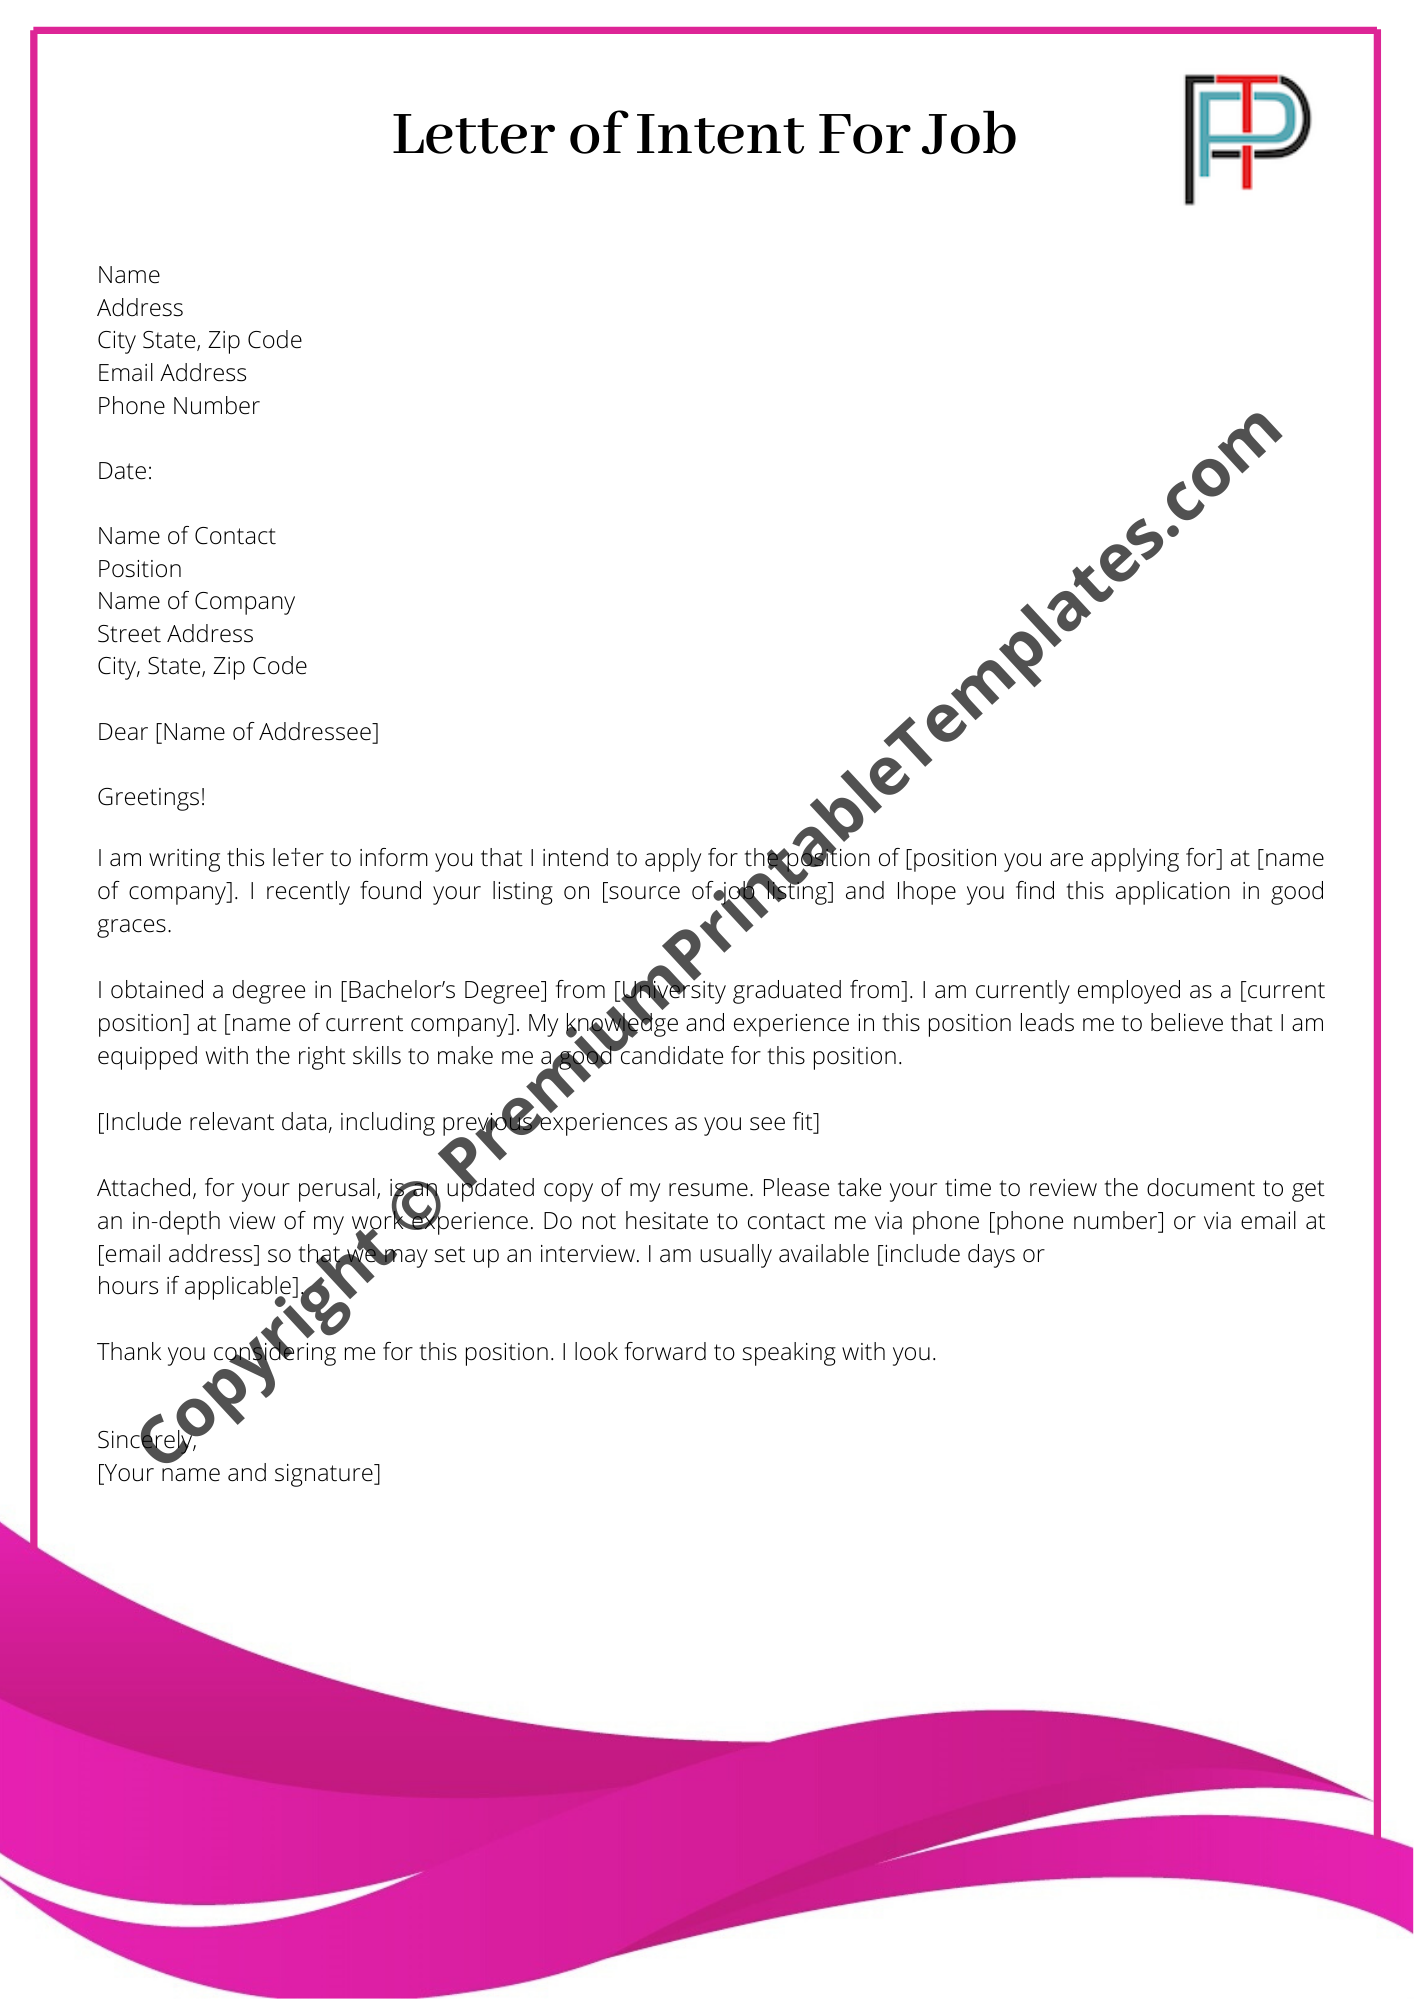 letter-of-intent-for-a-job-editable-template-pack-of-5-in-pdf-and-word